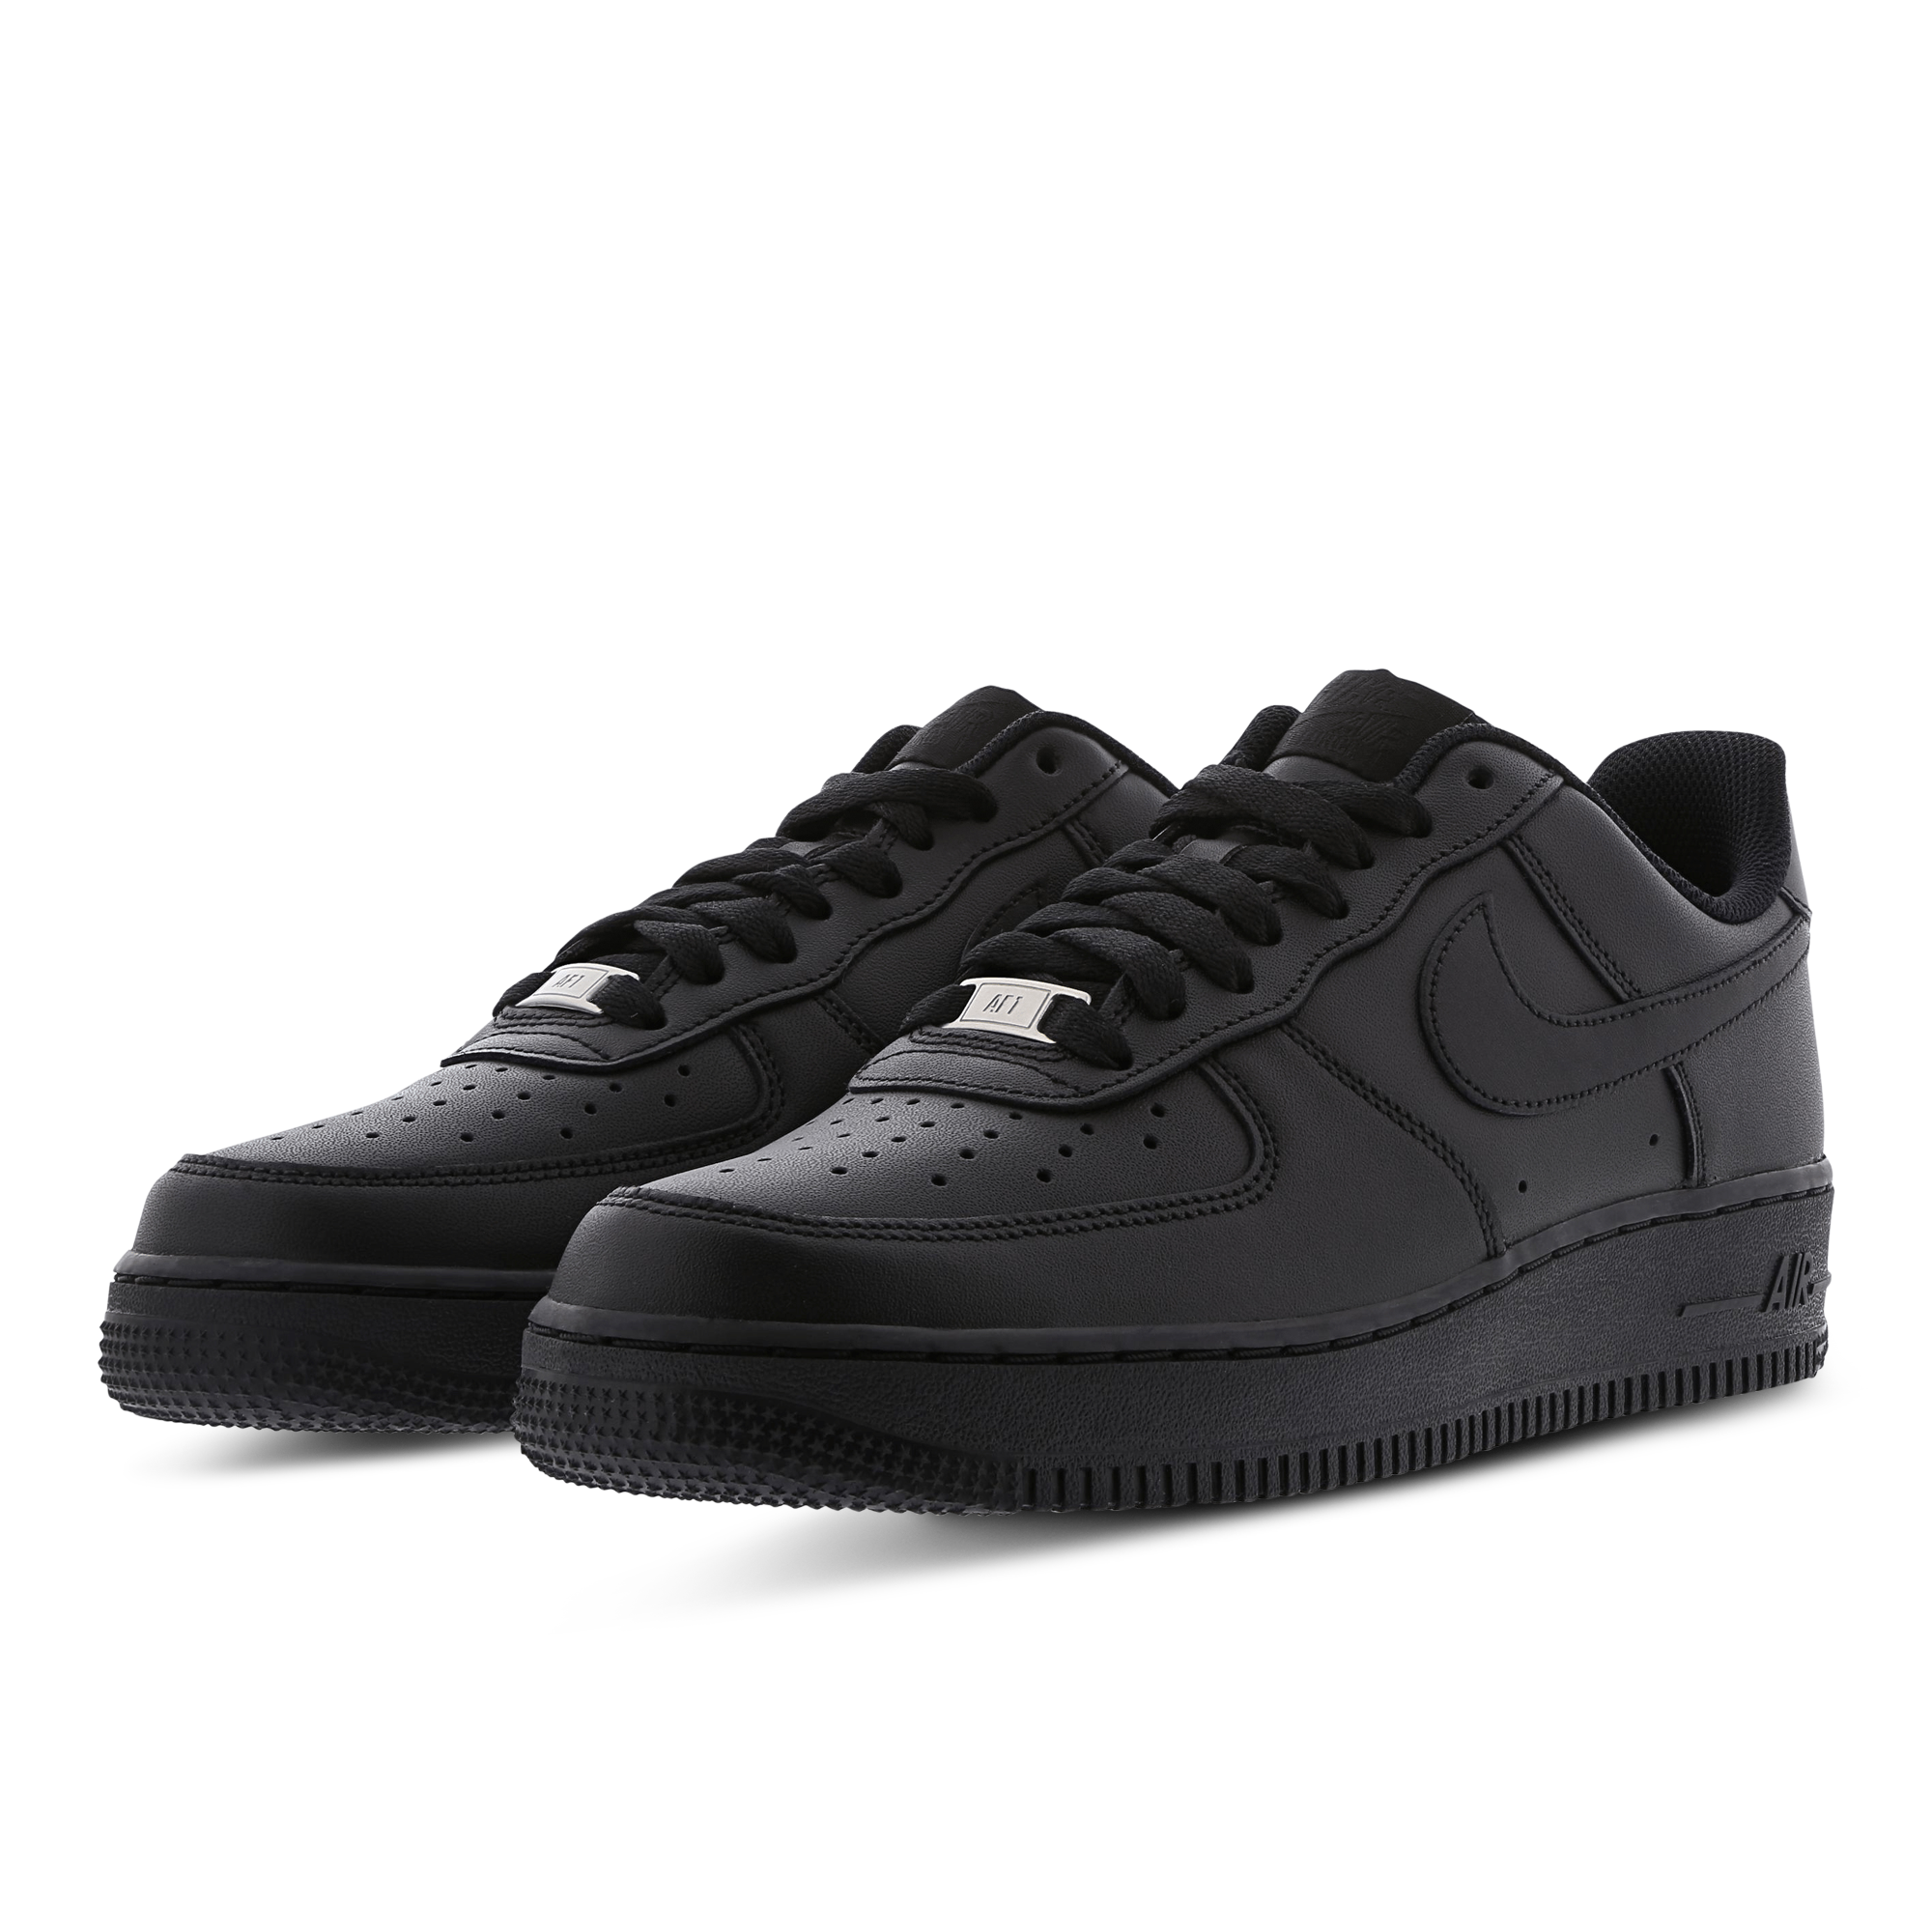 mike air force 1 07